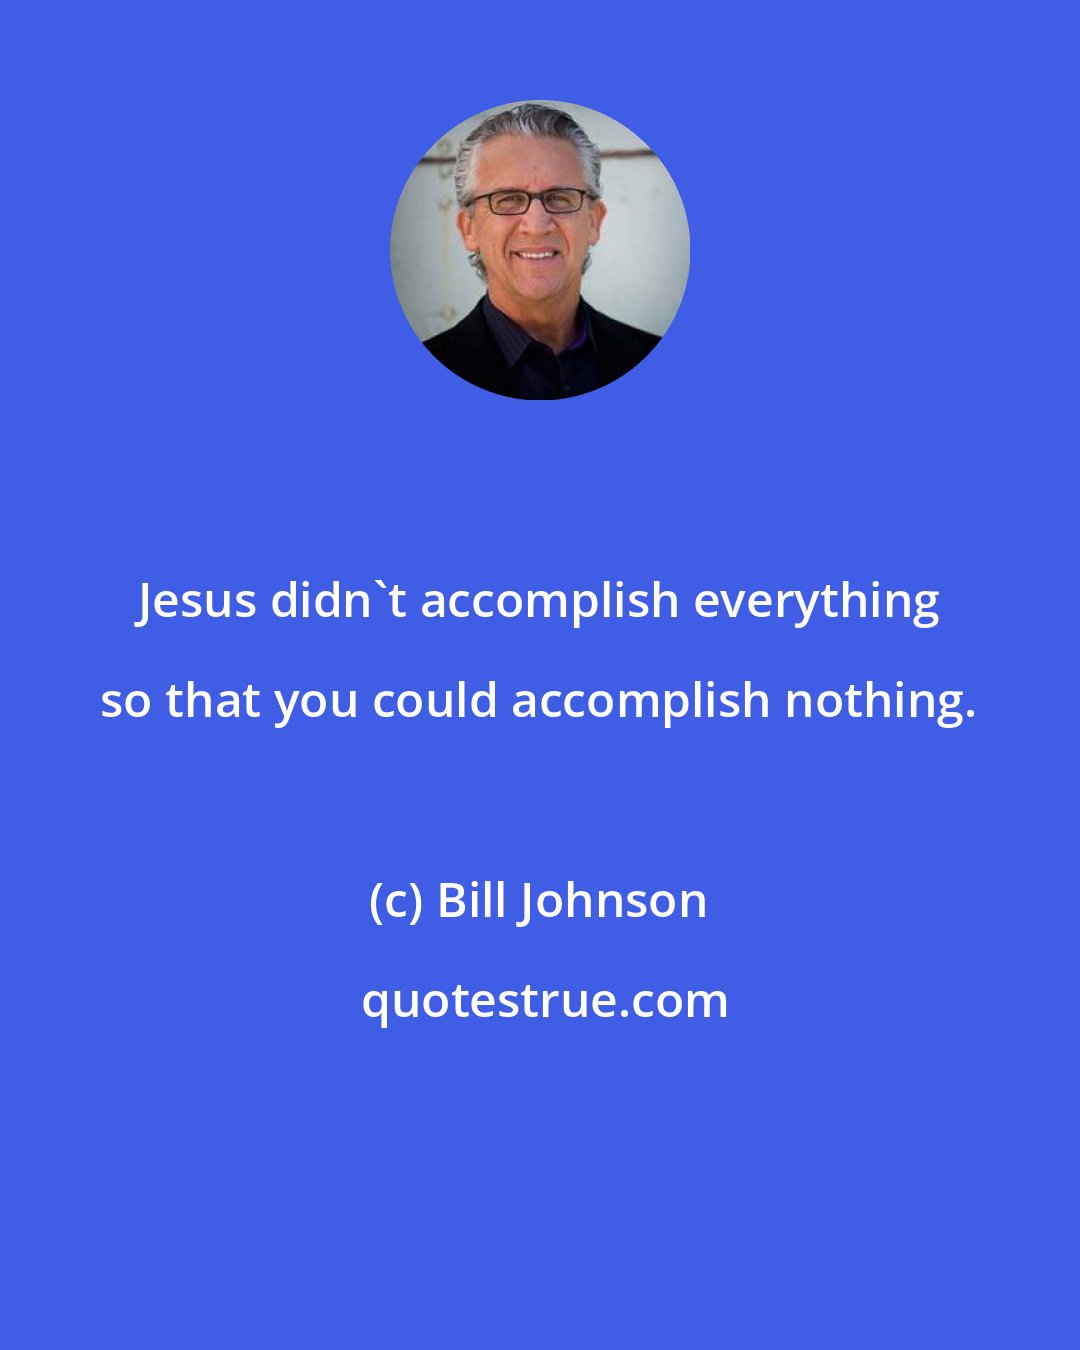 Bill Johnson: Jesus didn't accomplish everything so that you could accomplish nothing.